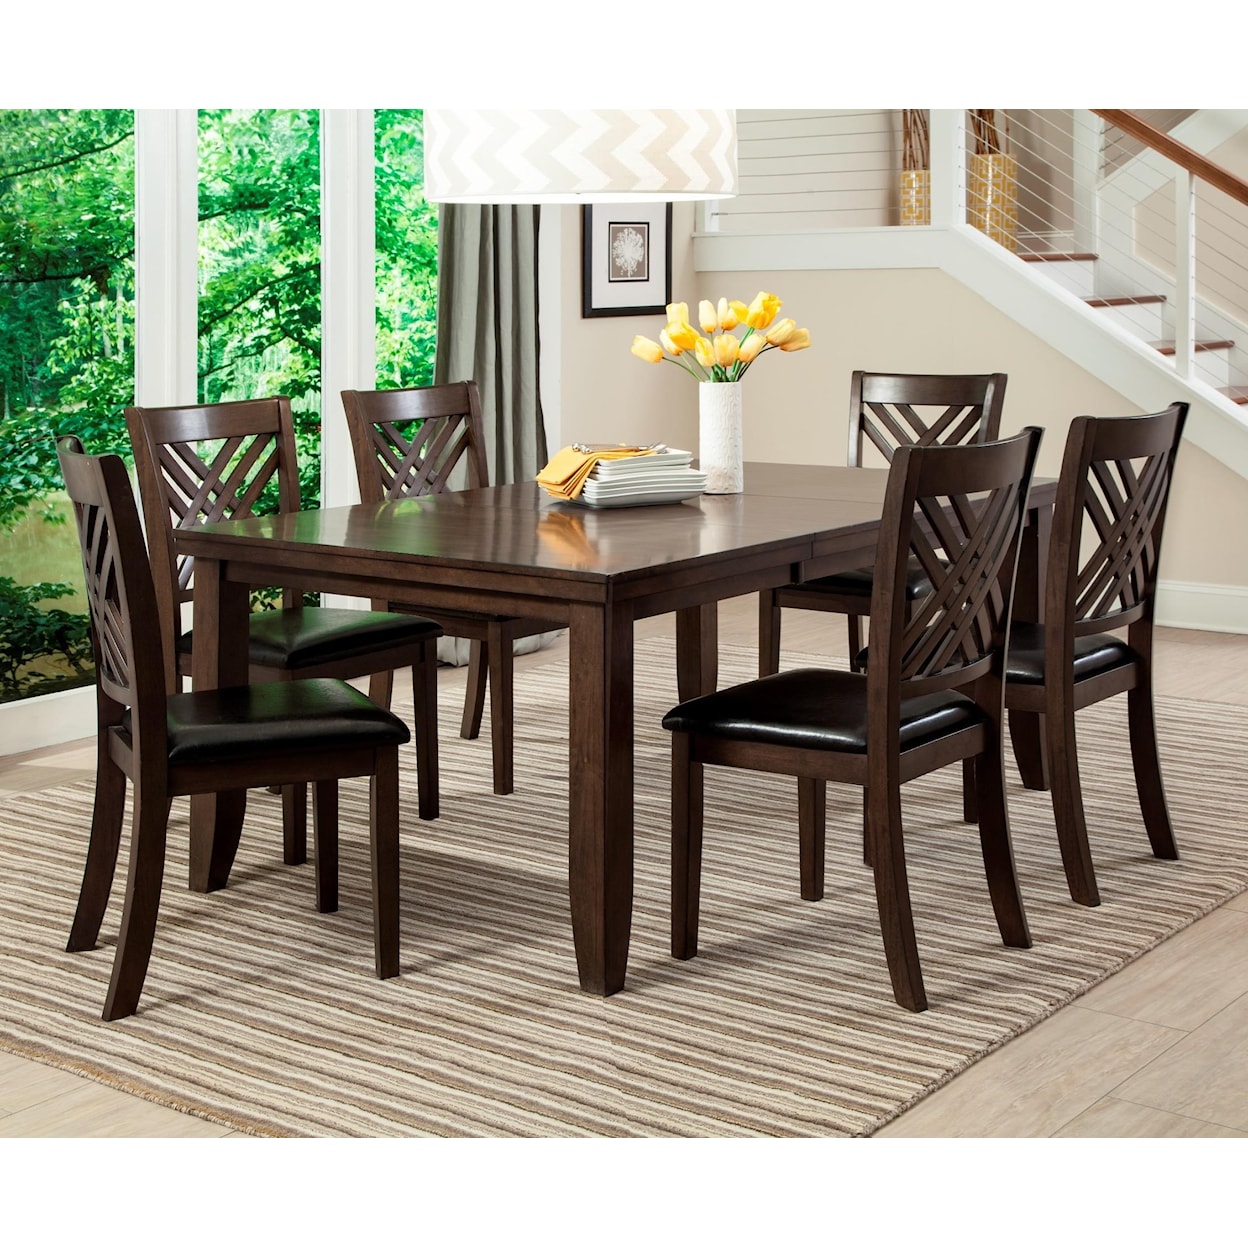 Lifestyle Cassidy 7 Pc Dining Group